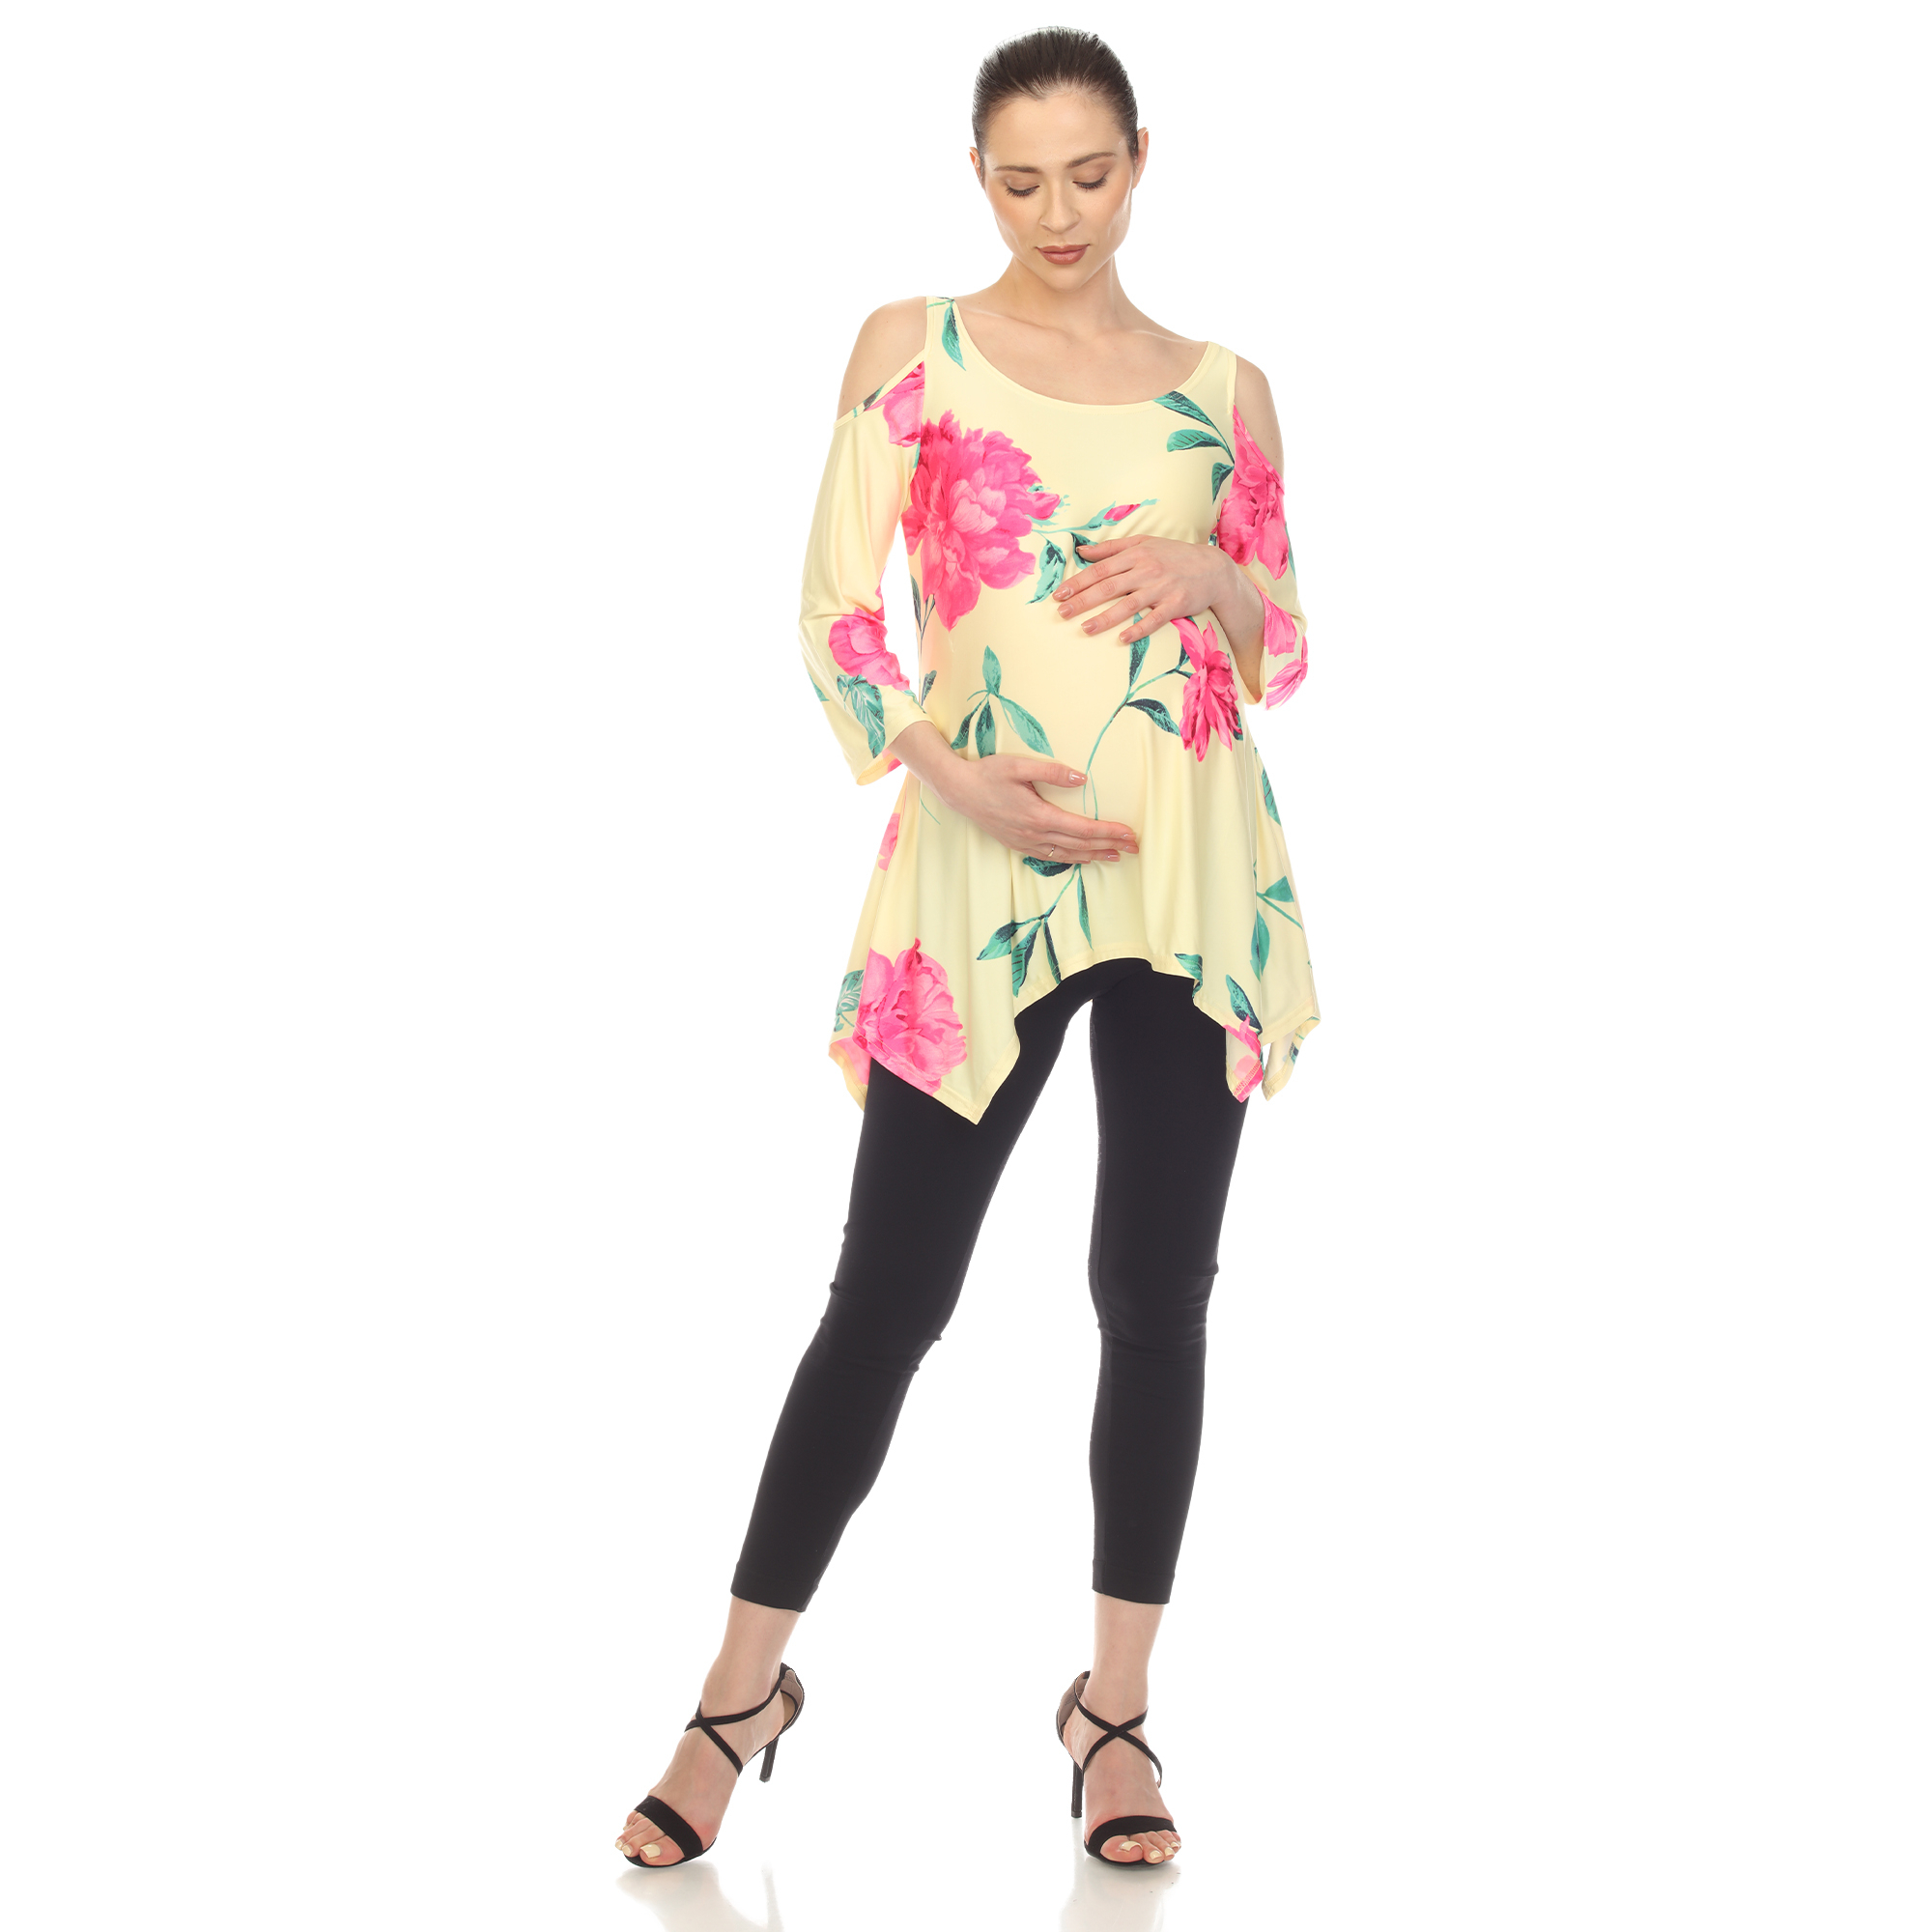 White Mark Women's Maternity Floral Cold Shoulder Tunic Top - Yellow/Pink, 2X